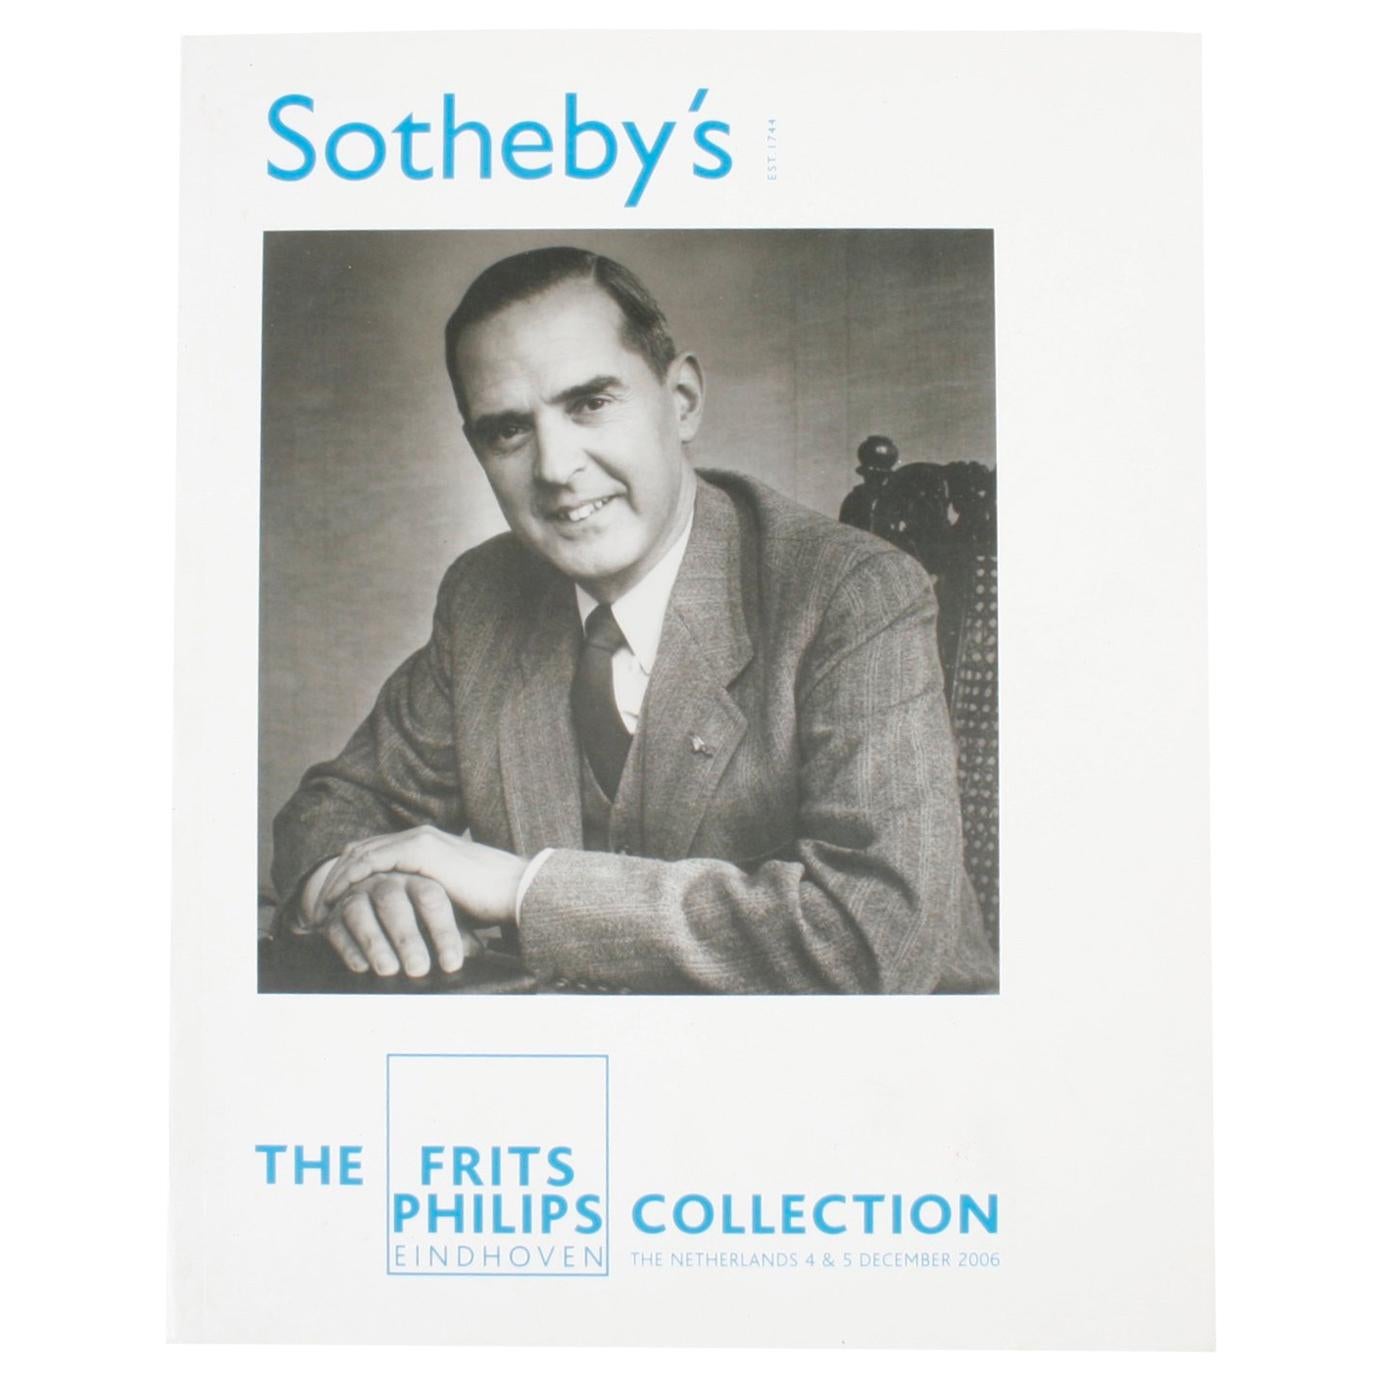 "Sotheby's The Frits Philips Collection Eindhoven 12/4/06" Book